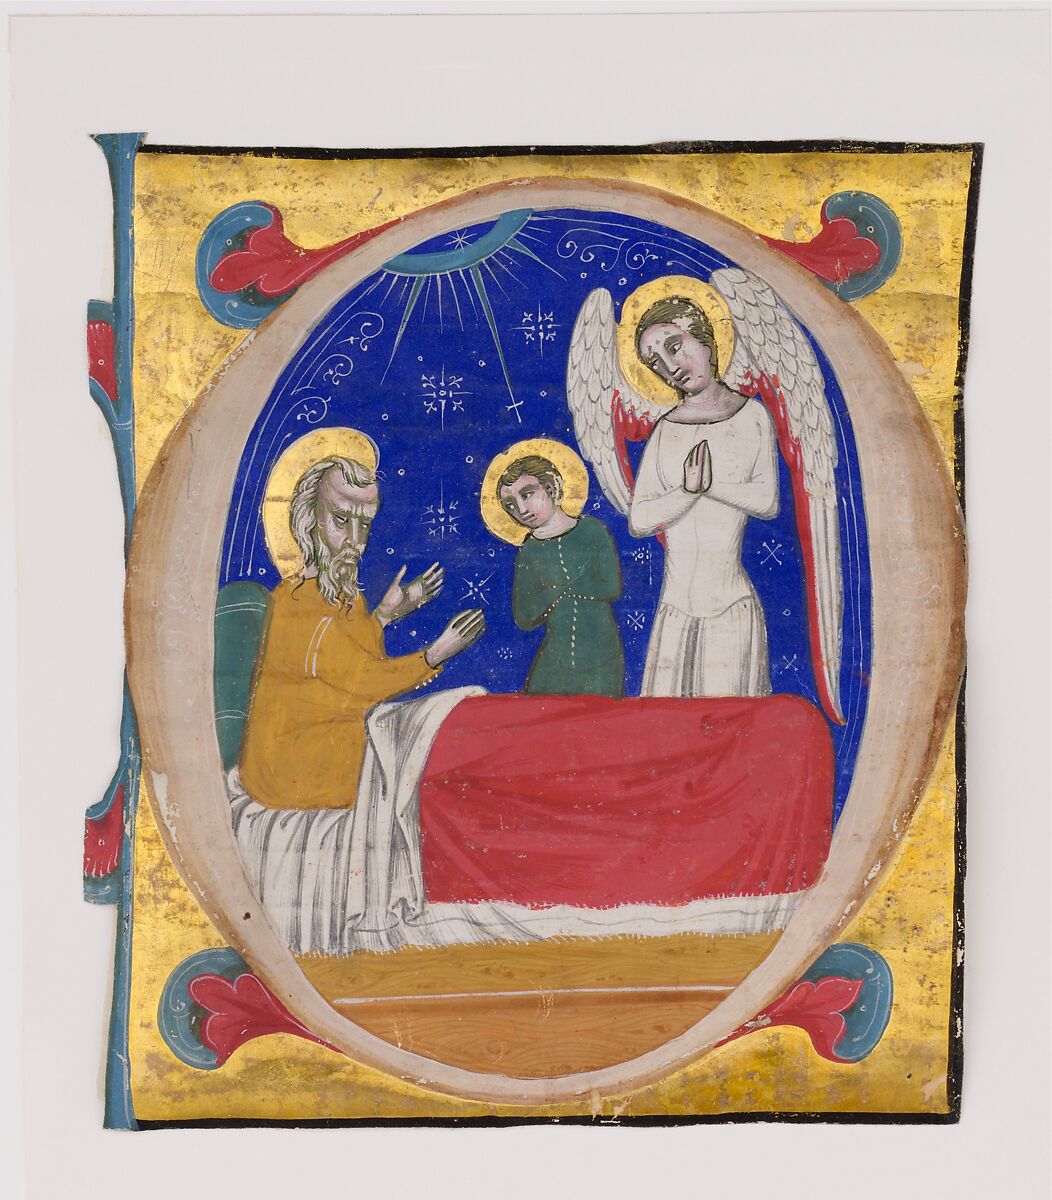 Manuscript Illumination with Tobit, Tobias, and the Archangel Raphael in an Initial O, from an Antiphonary, Tempera, ink, and  gold on parchment, Italian 